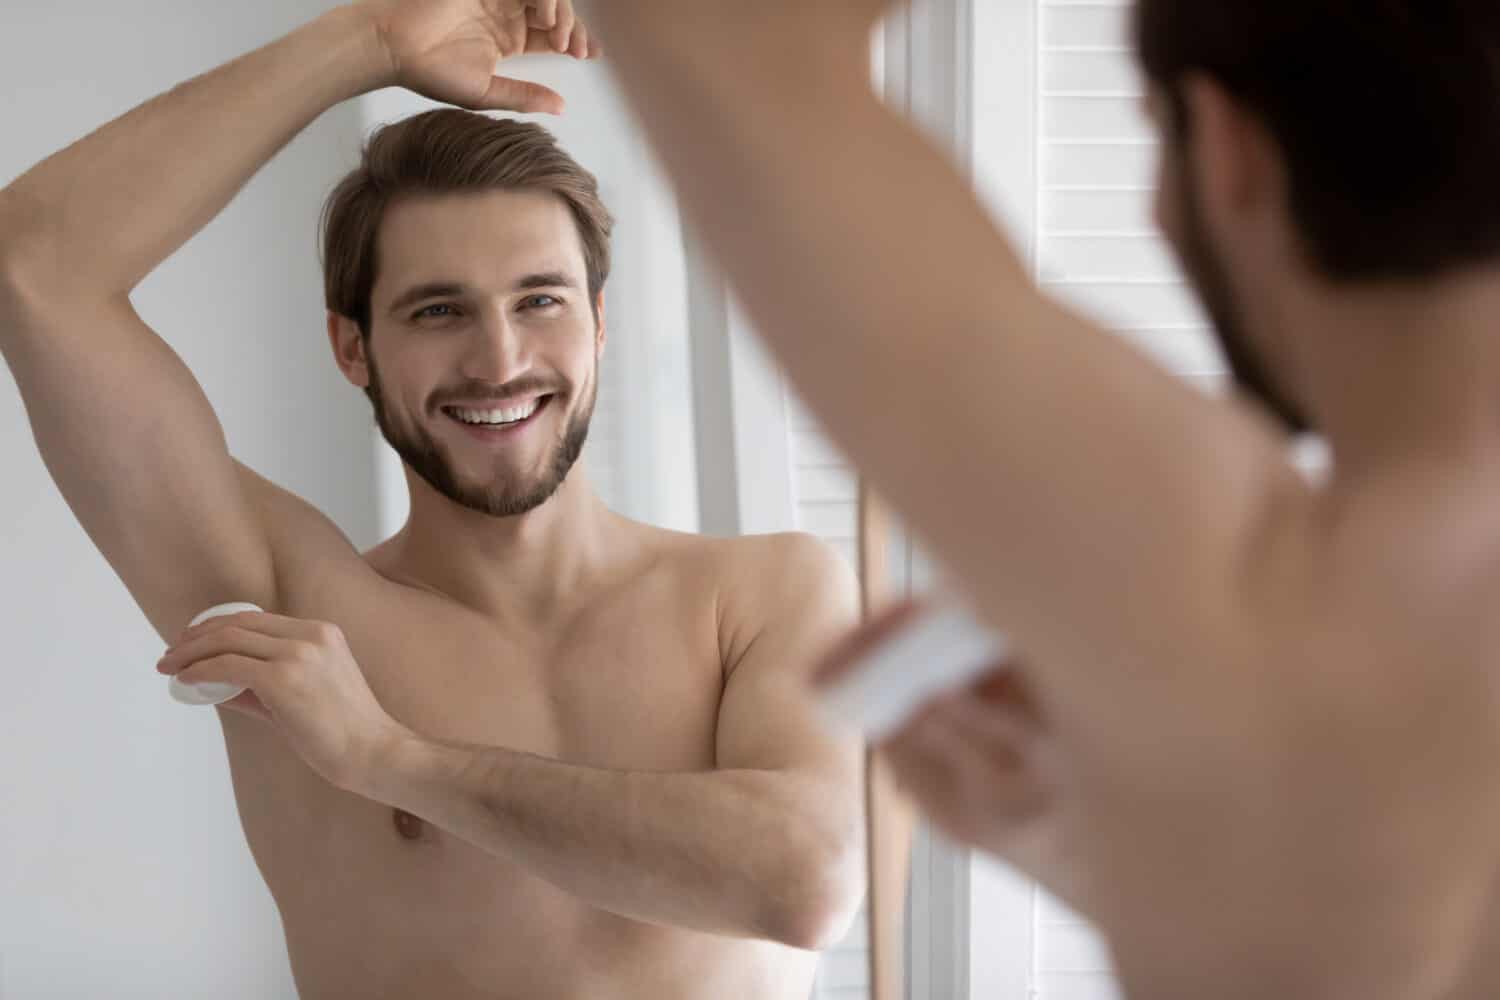 Mirror reflection smiling young man applying antiperspirant on armpit after shower, standing in bathroom, satisfied handsome guy enjoying morning routine procedure, using stick underarm deodorant